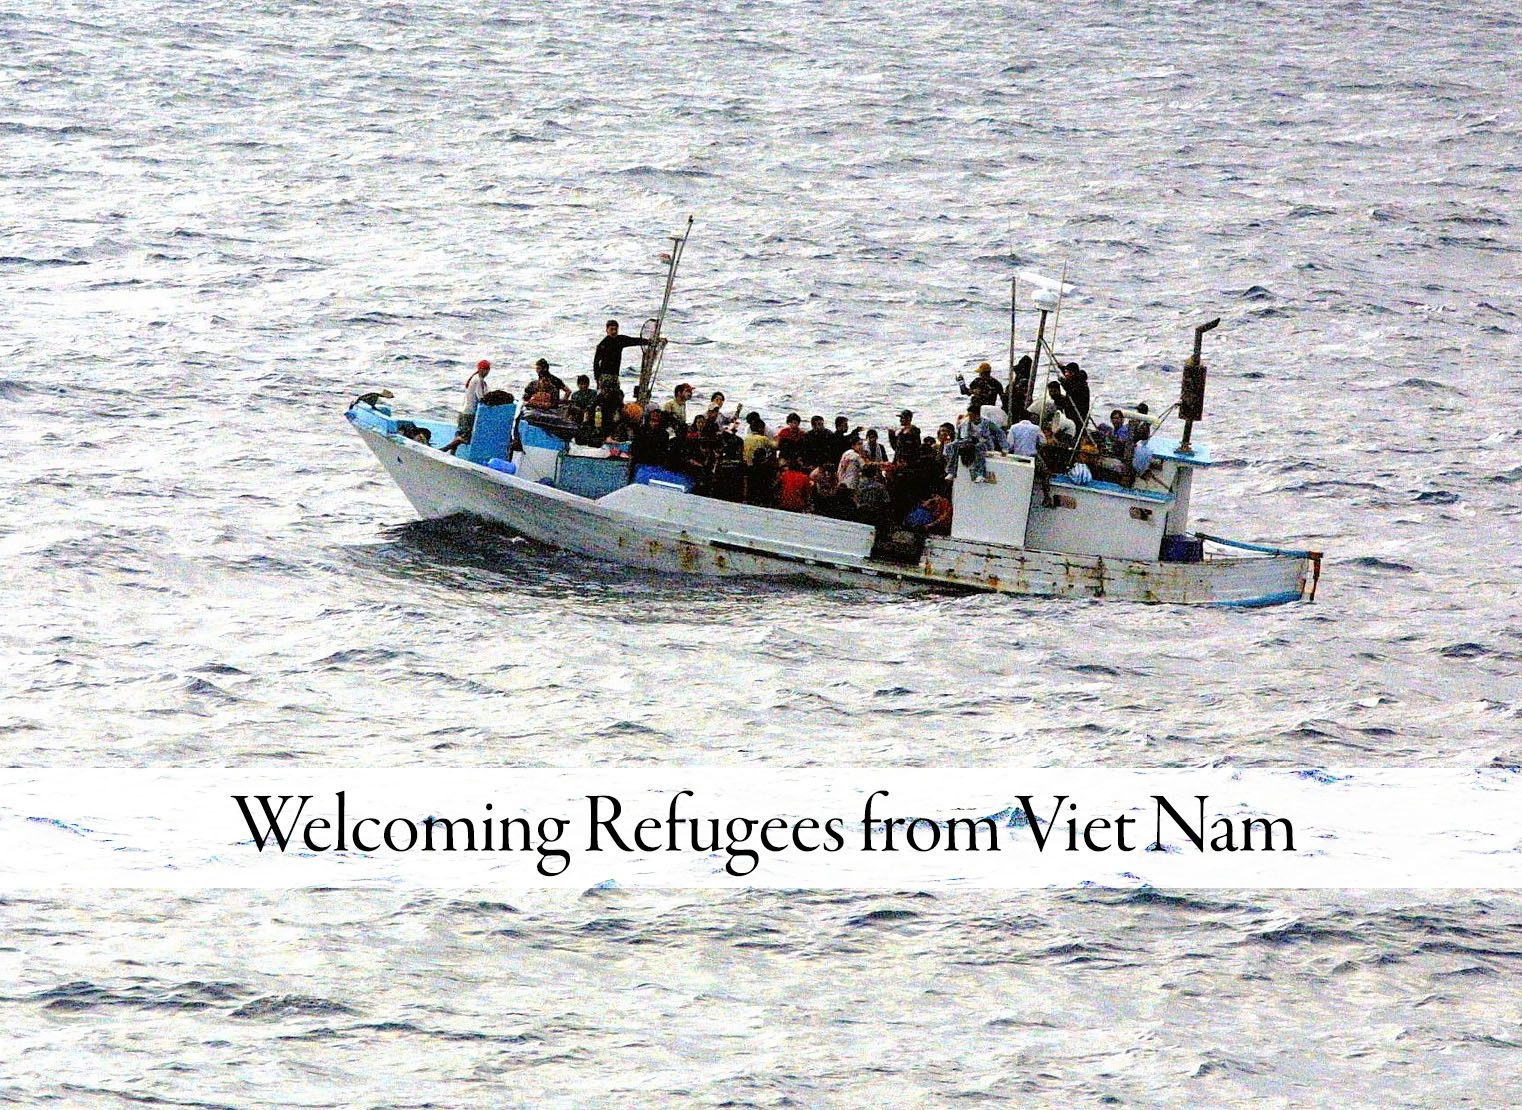 1975 – Welcoming Refugees